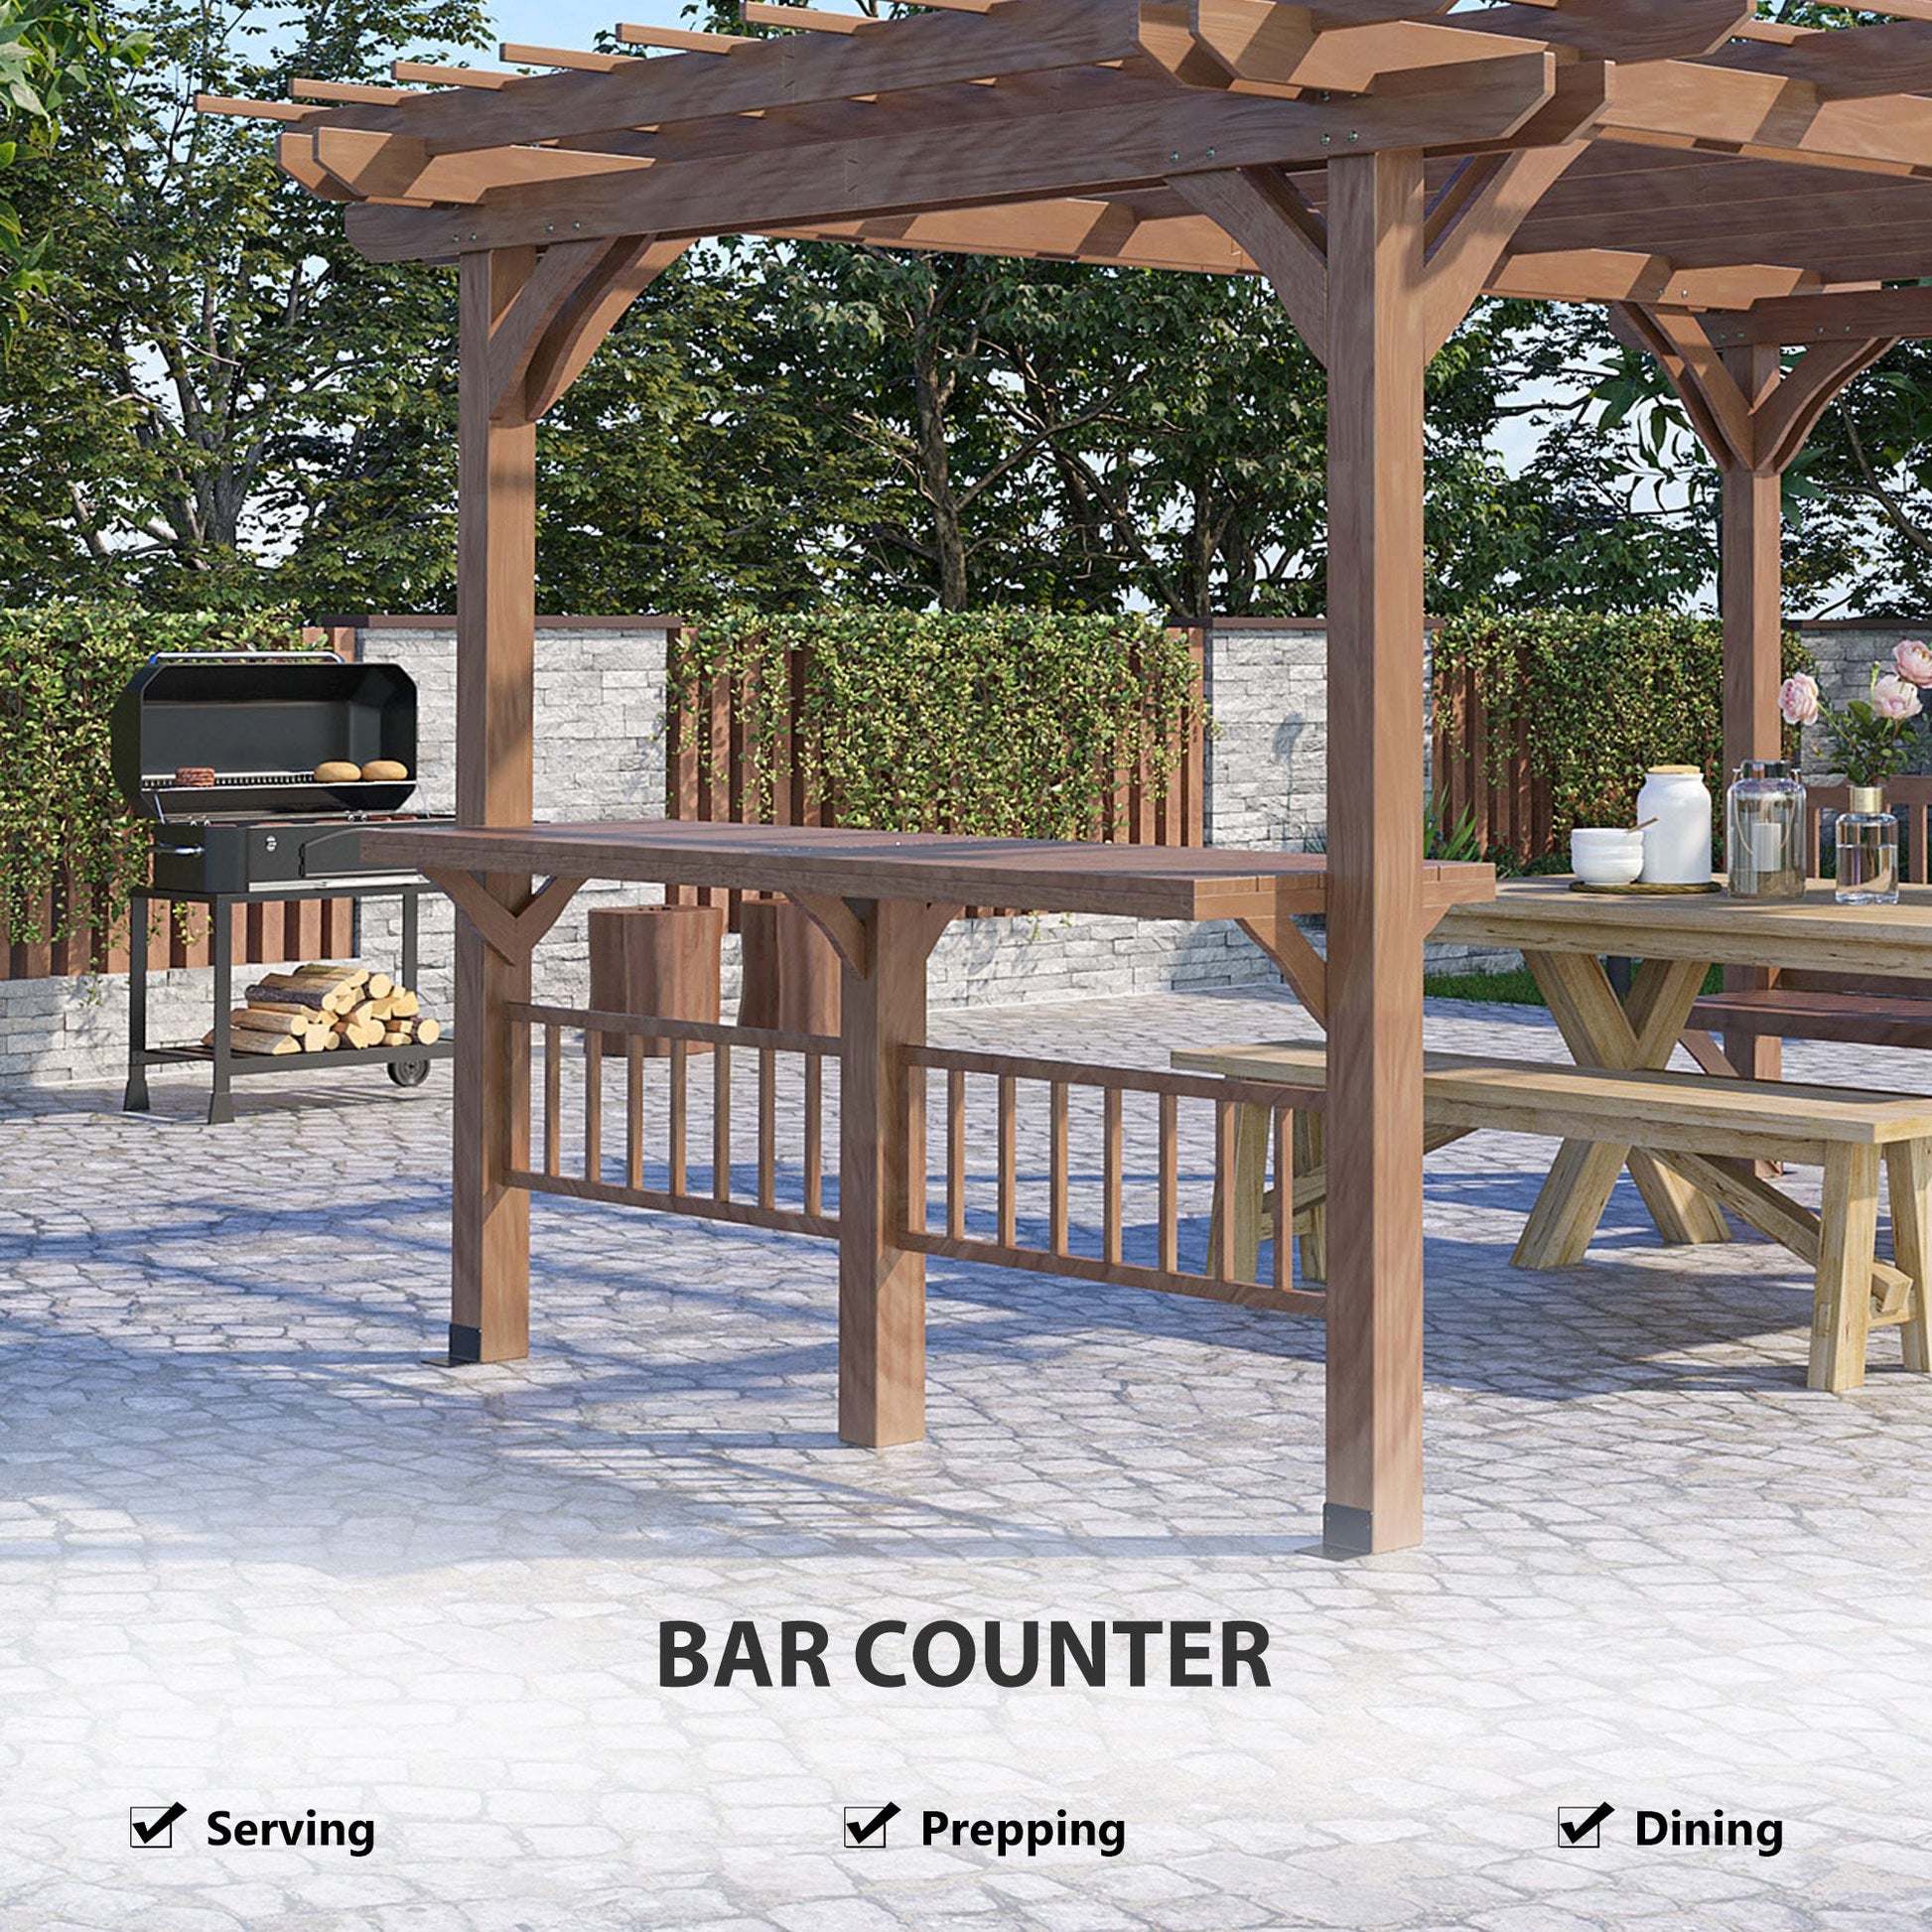 14' x 10' Outdoor Pergola, Wooden Gazebo Grill Canopy with Bar Counters and Seating Benches, for Garden, Patio, Backyard, Deck at Gallery Canada